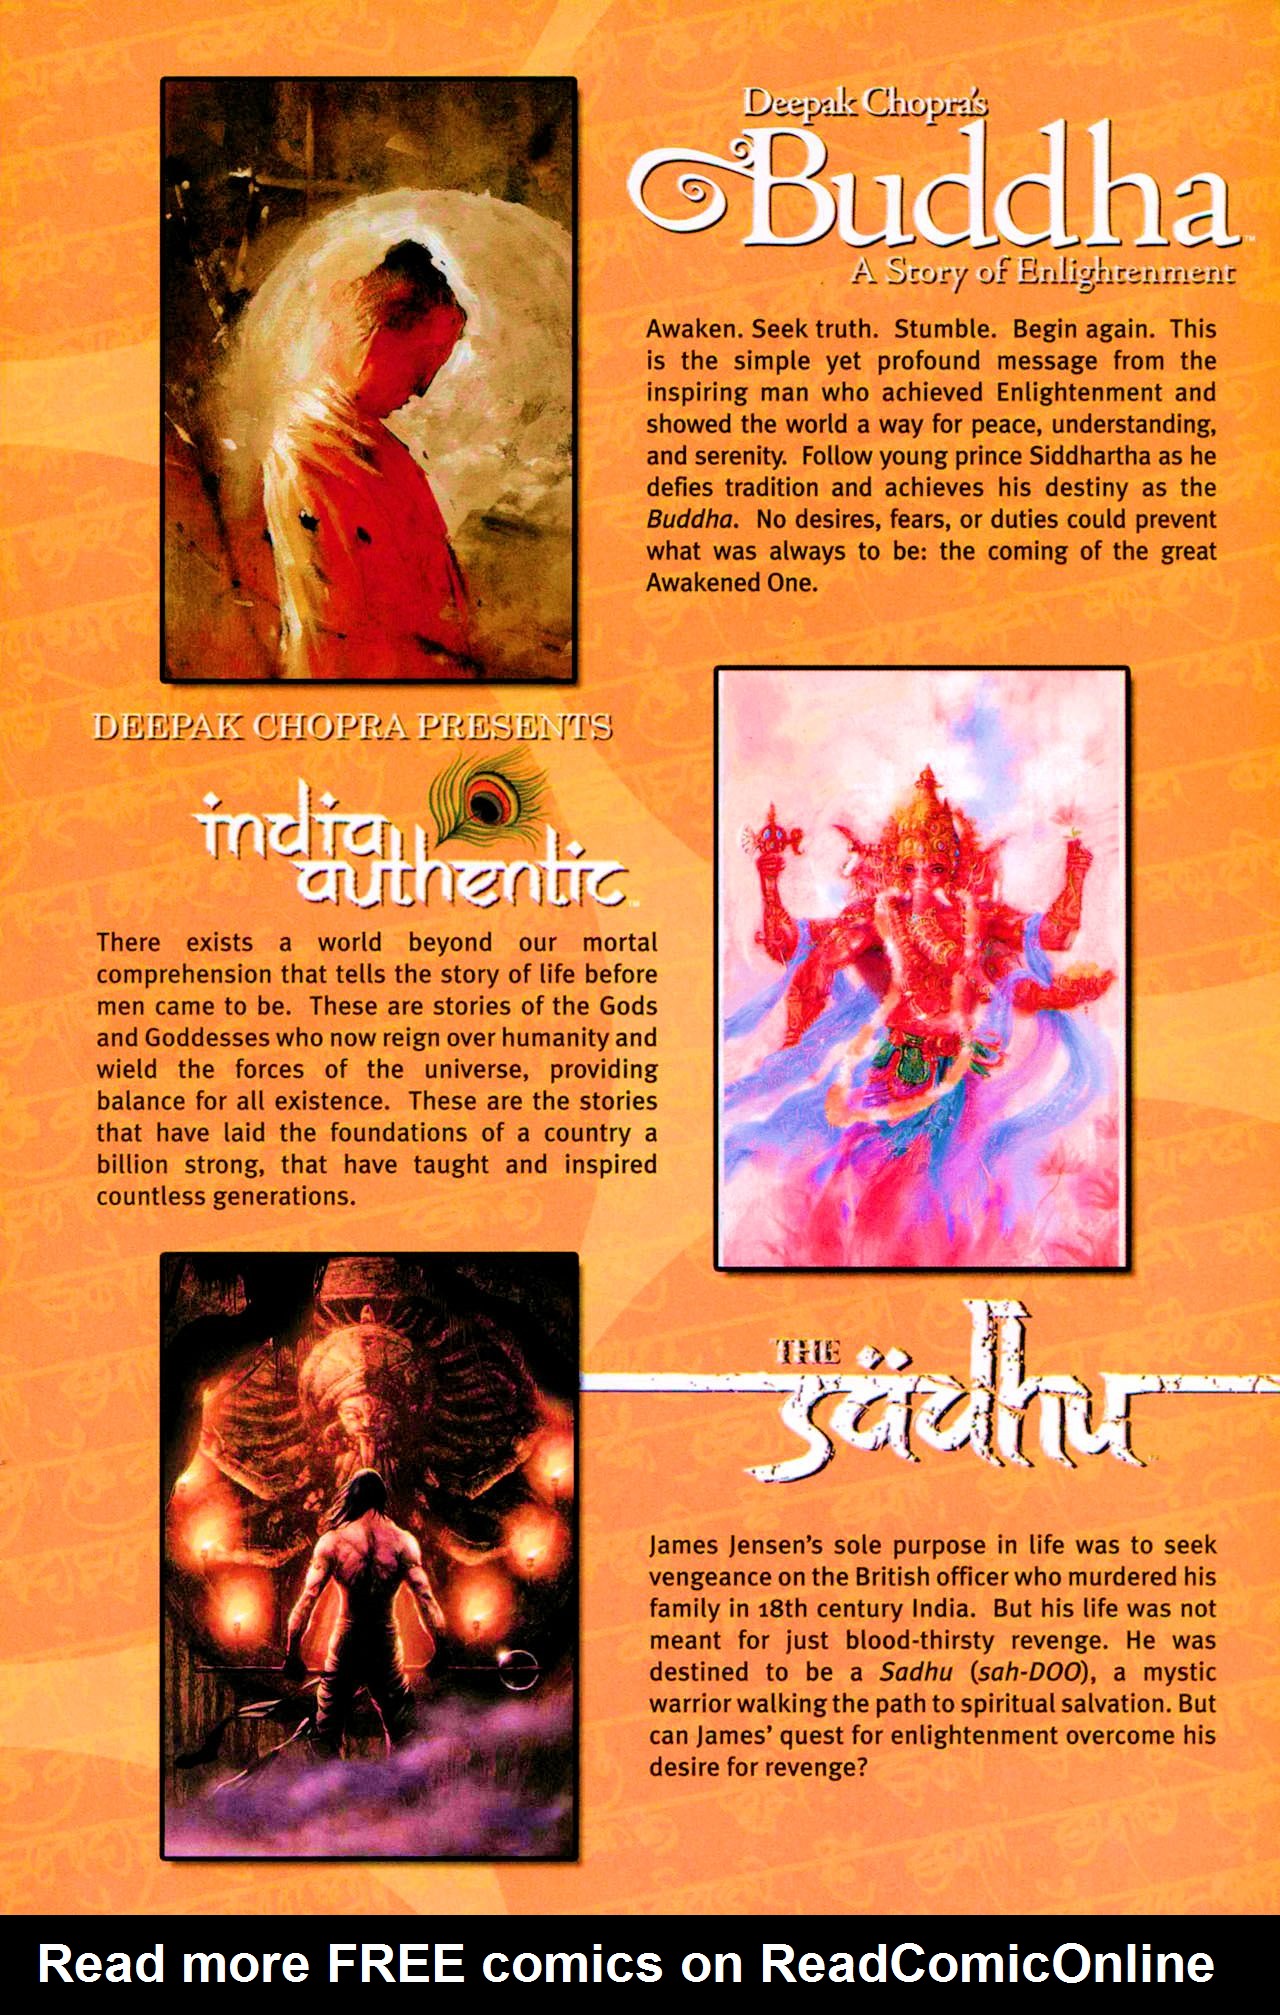 Read online India Authentic comic -  Issue #13 - 27